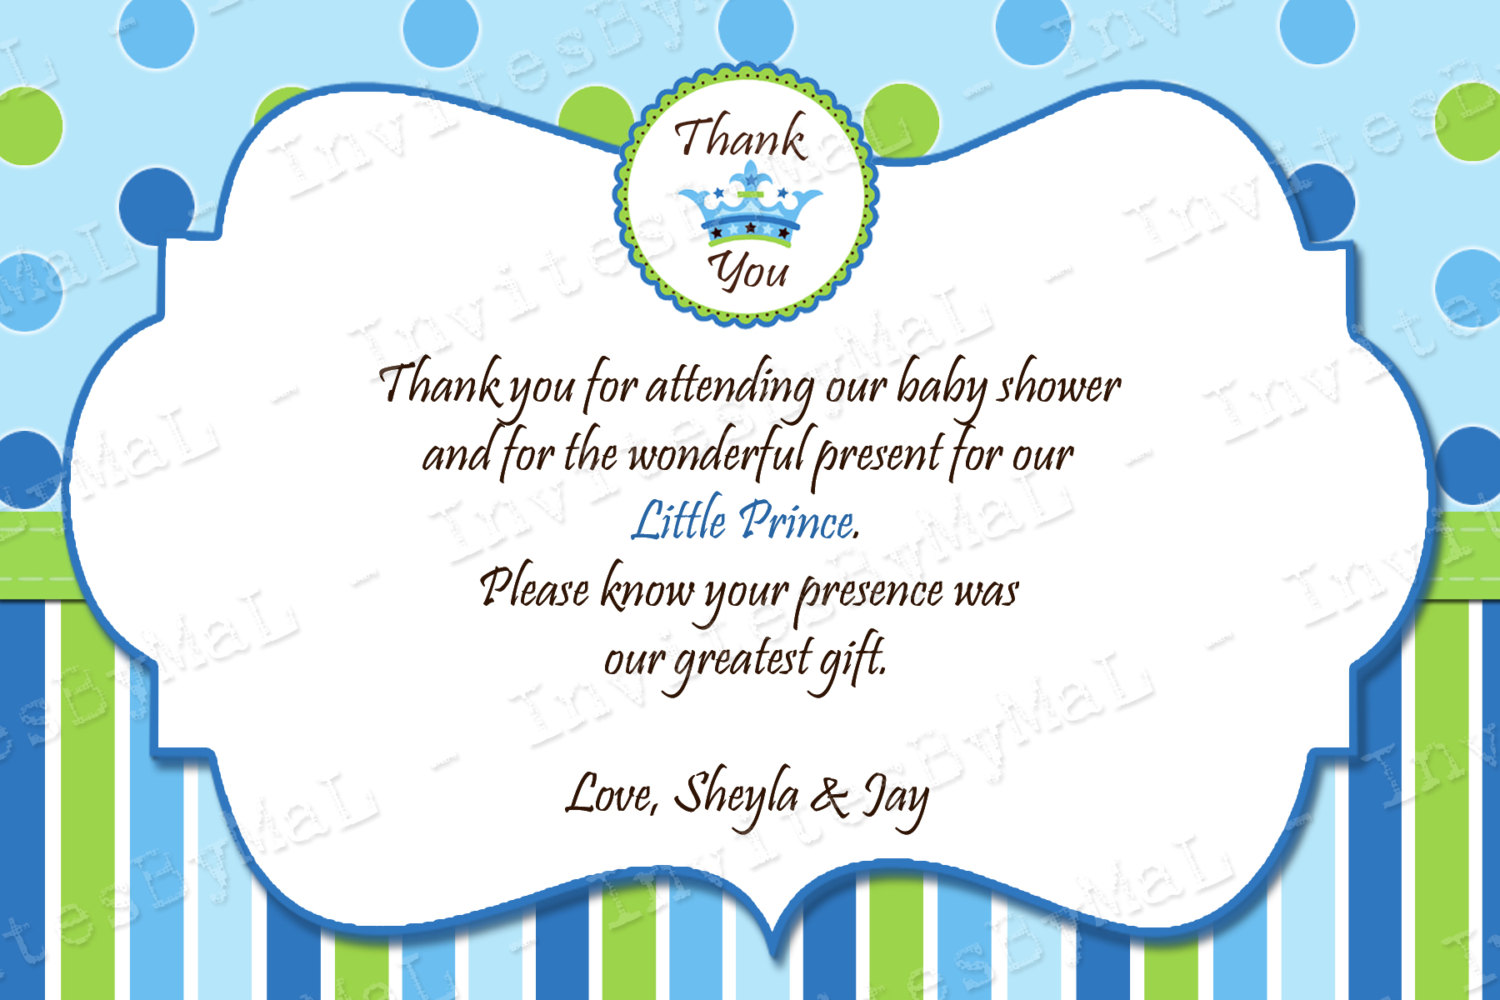 Full Size of Baby Shower:72+ Rousing Baby Shower Thank You Cards Picture Ideas Baby Shower Thank You Cards Baby Shower Keepsakes Baby Shower Venues Near Me Baby Shower Venues London Baby Shower Announcements Baby Shower Cookies Baby Shower Baskets